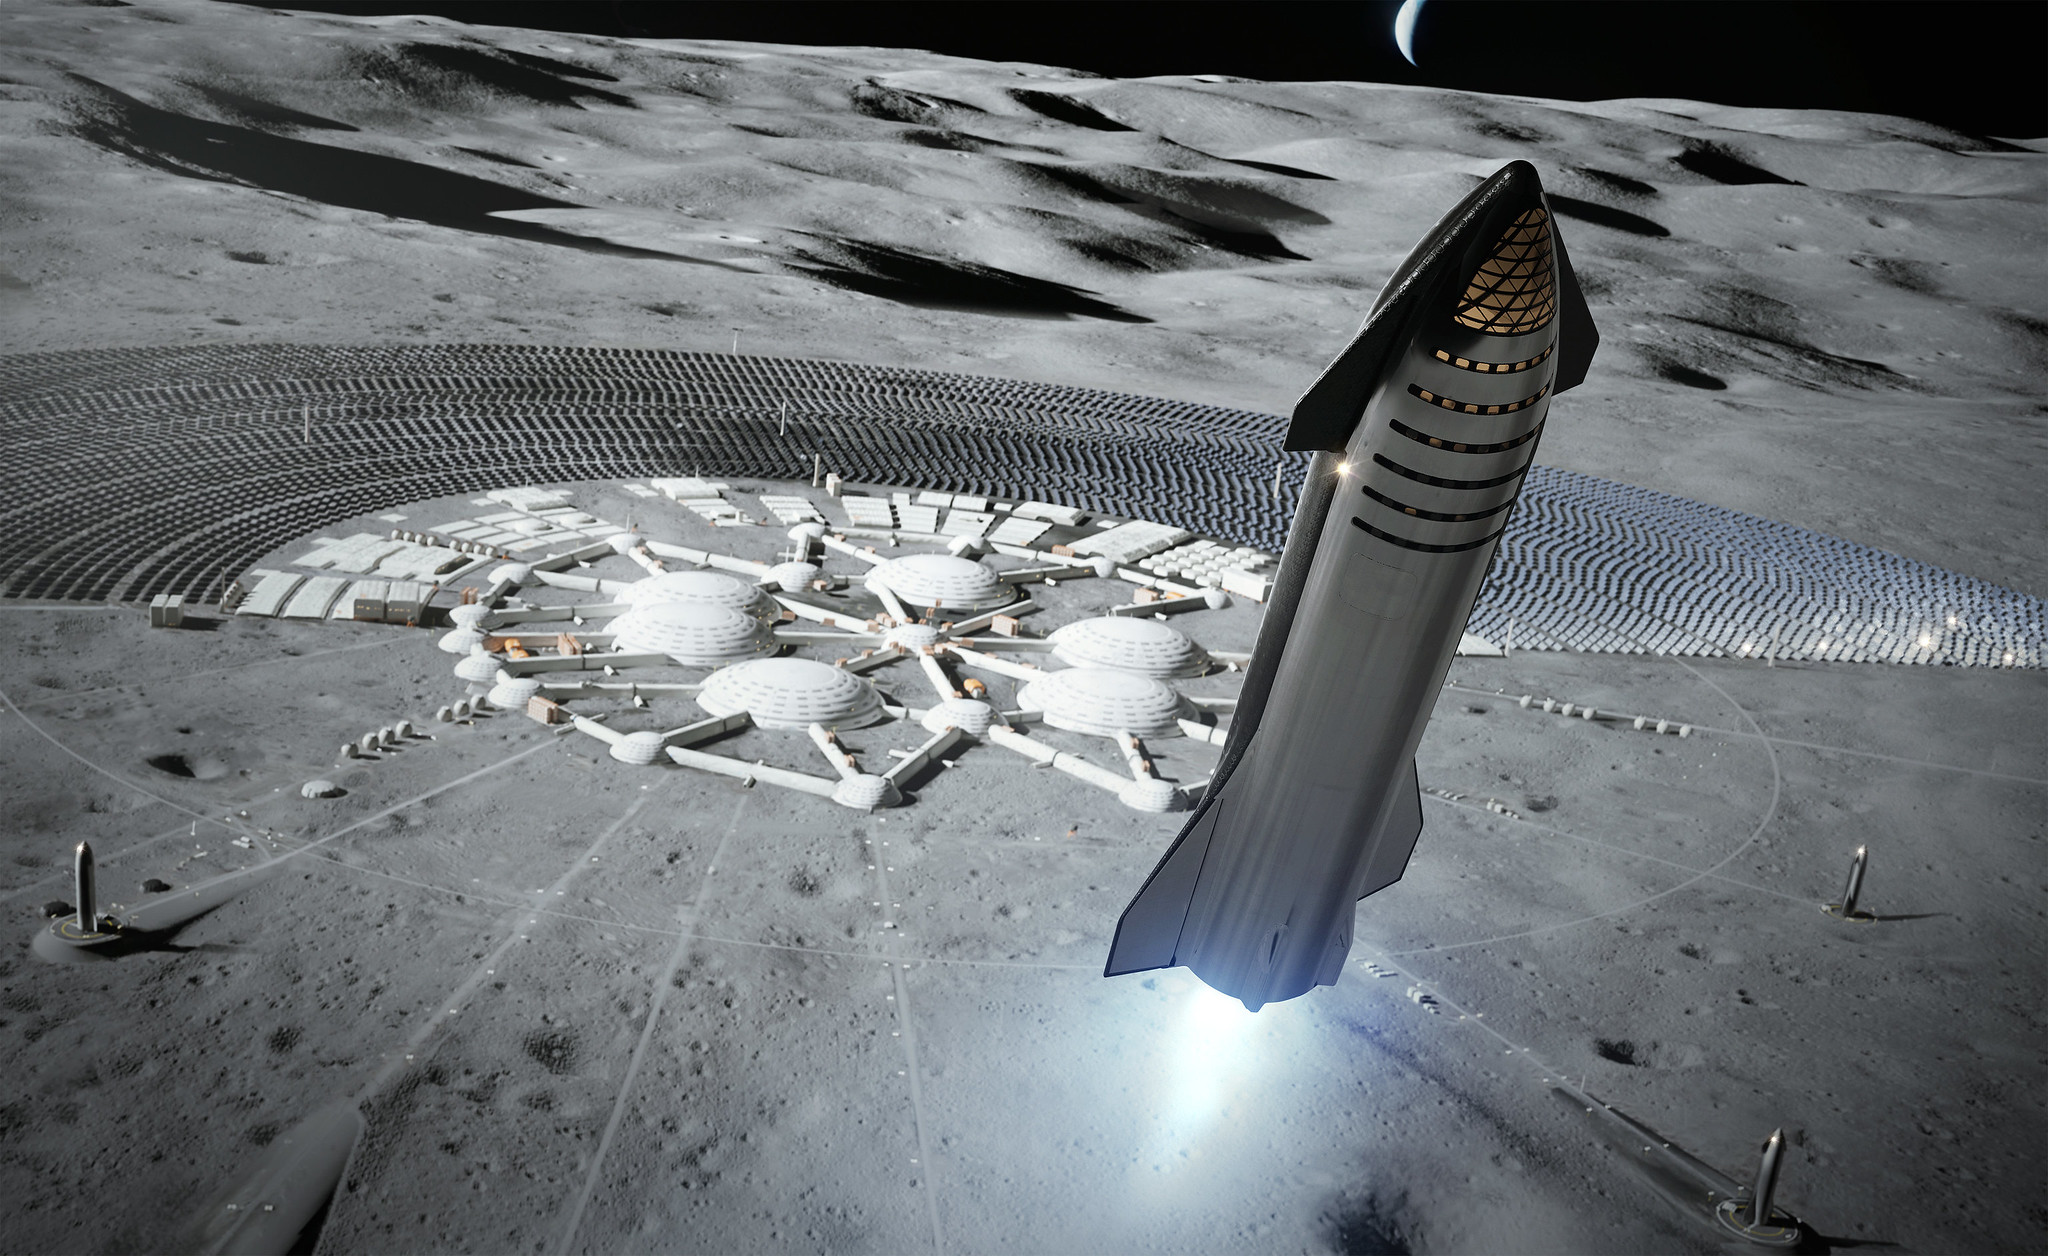 Nasas Bold Bet On Starship For The Moon May Change Spaceflight Forever